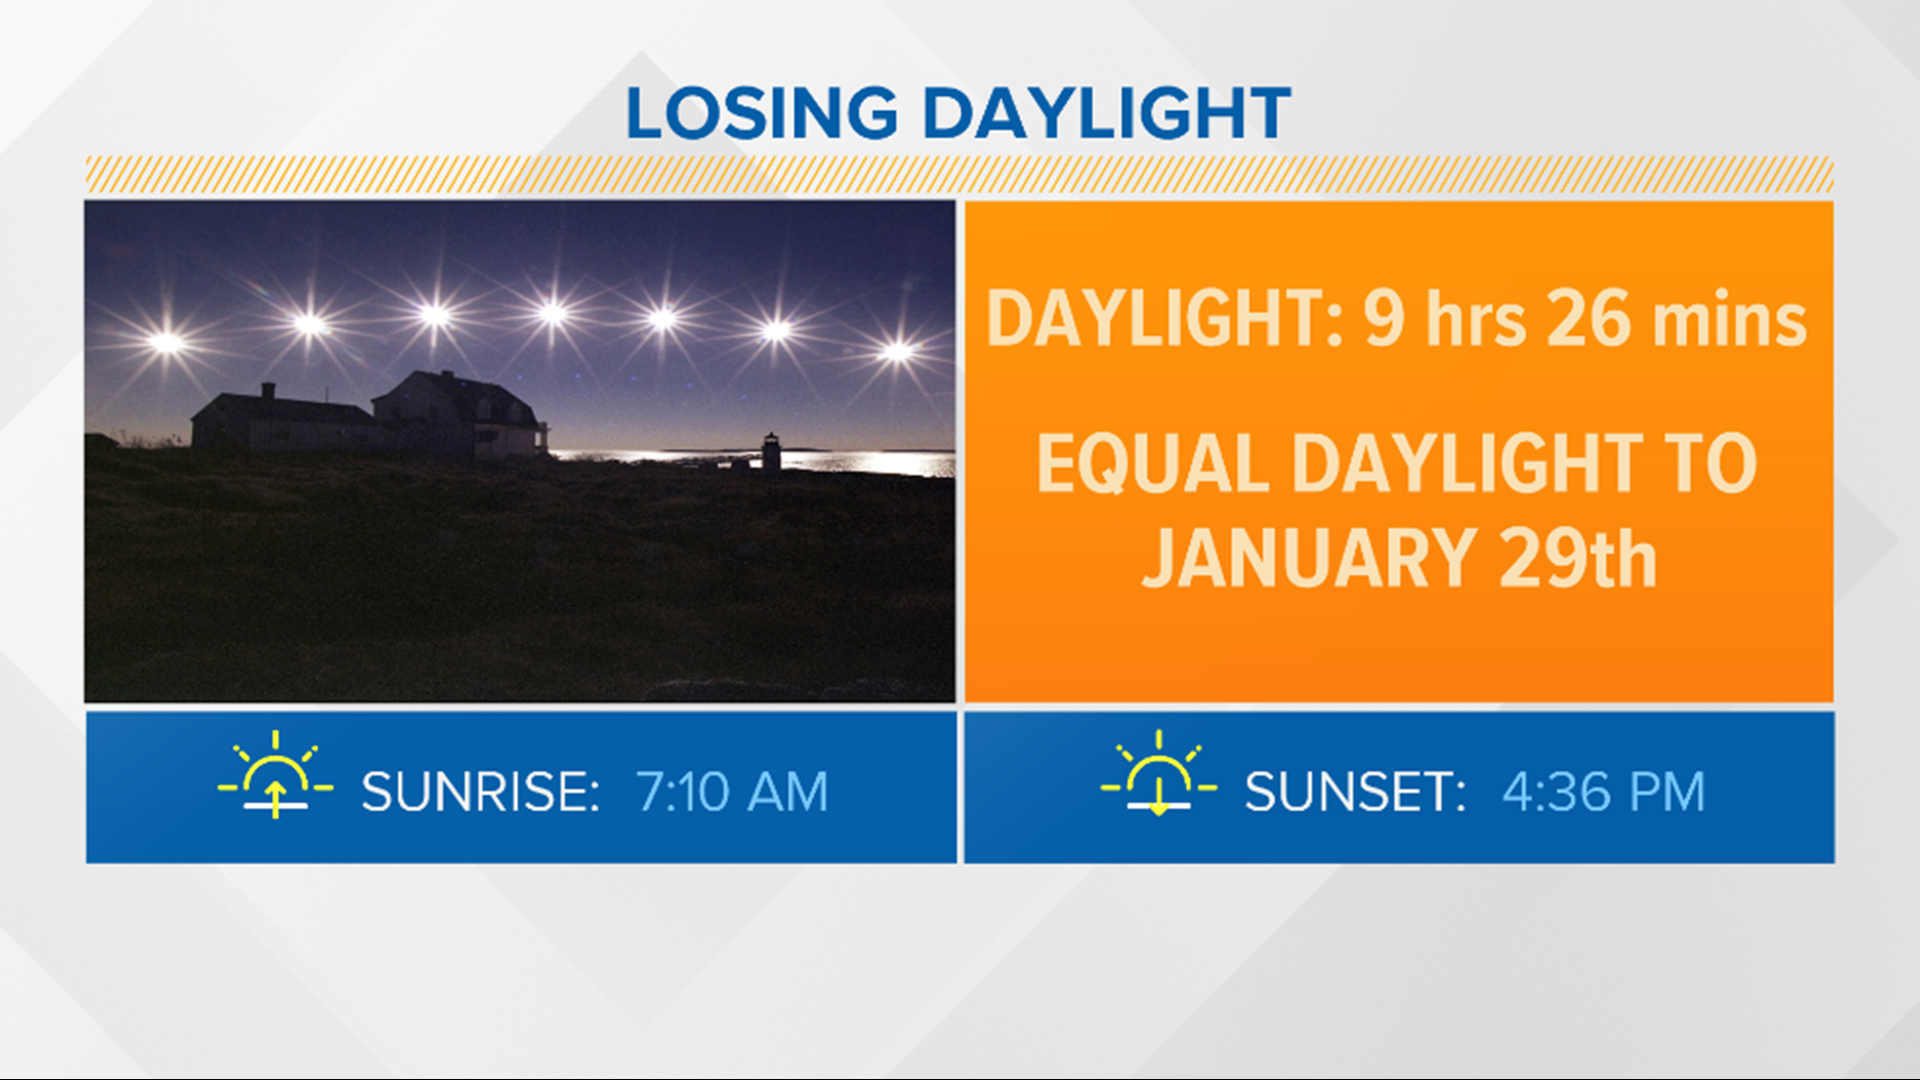 Daylight dwindling less than 10 hours and shrinking